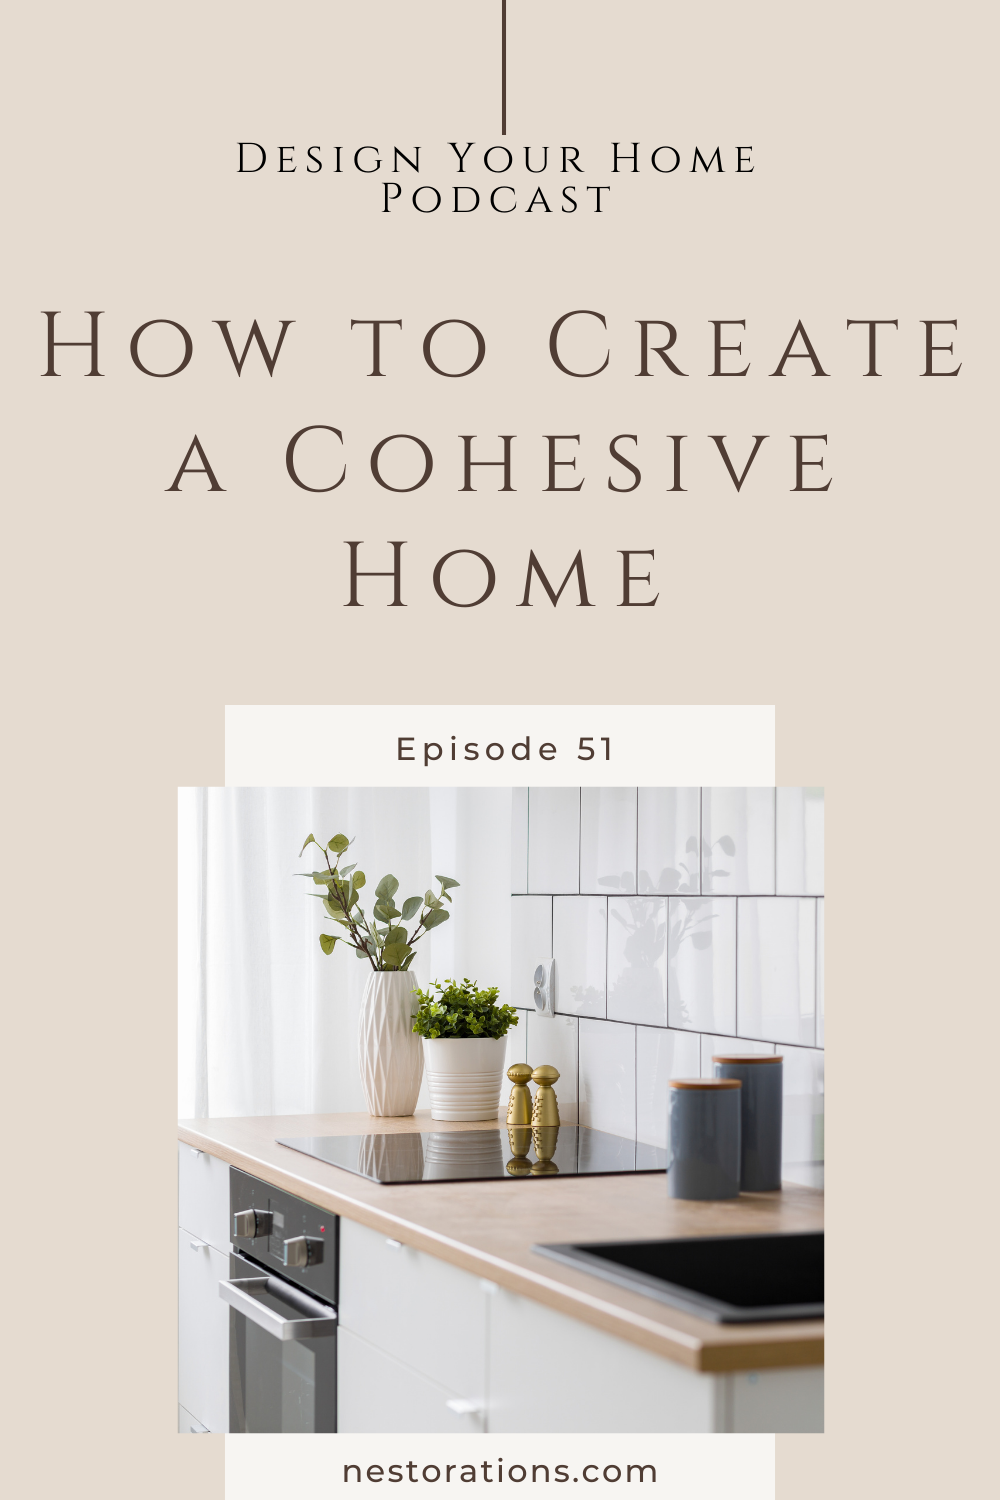 How to Create a Cohesive Home